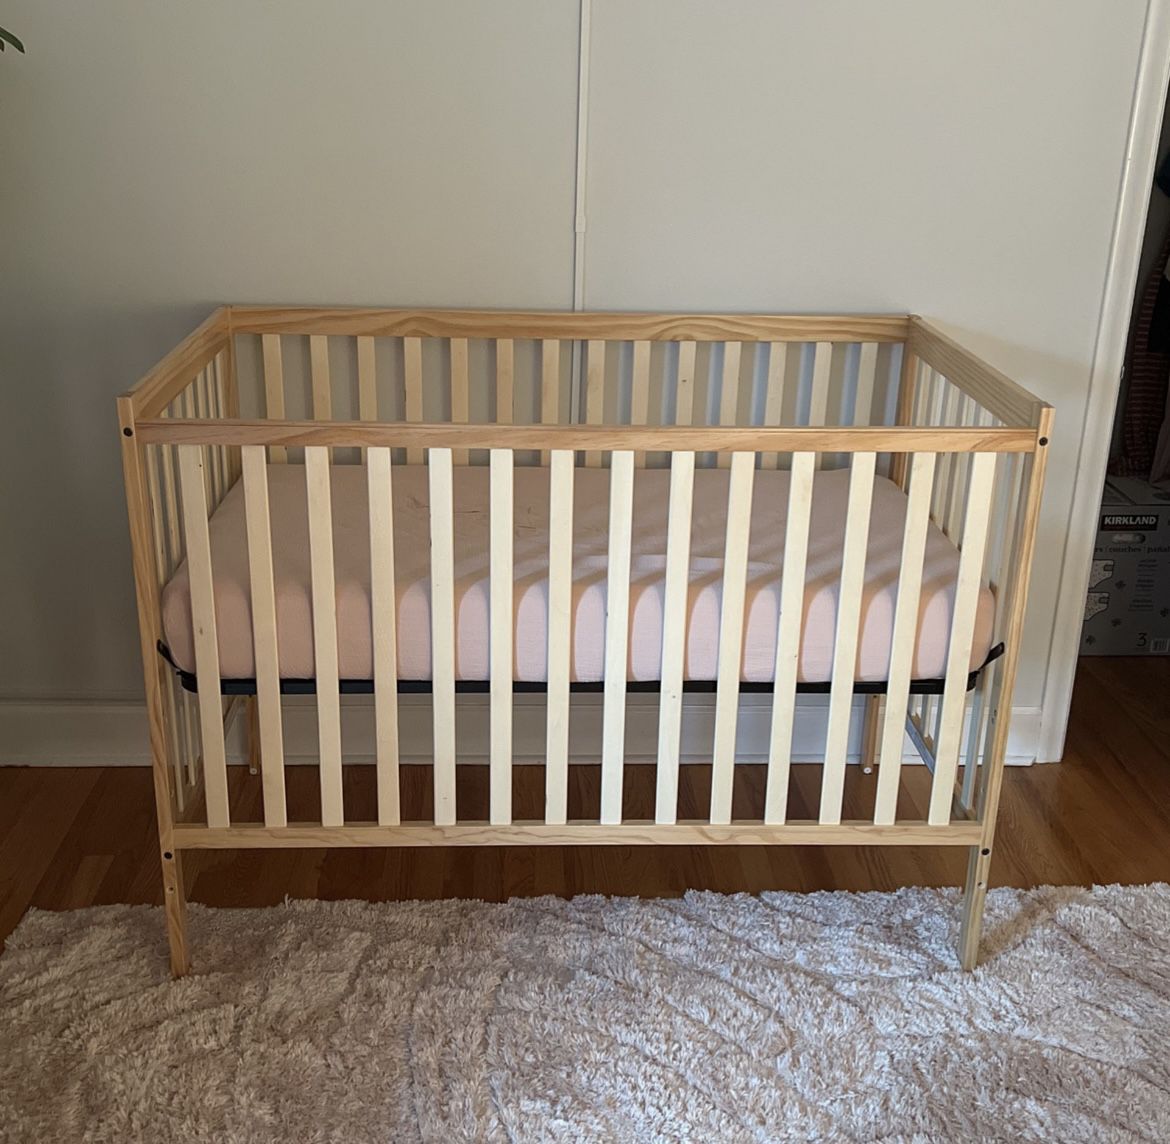 Dream On Me 5-in-1 Convertible Crib In Natural 